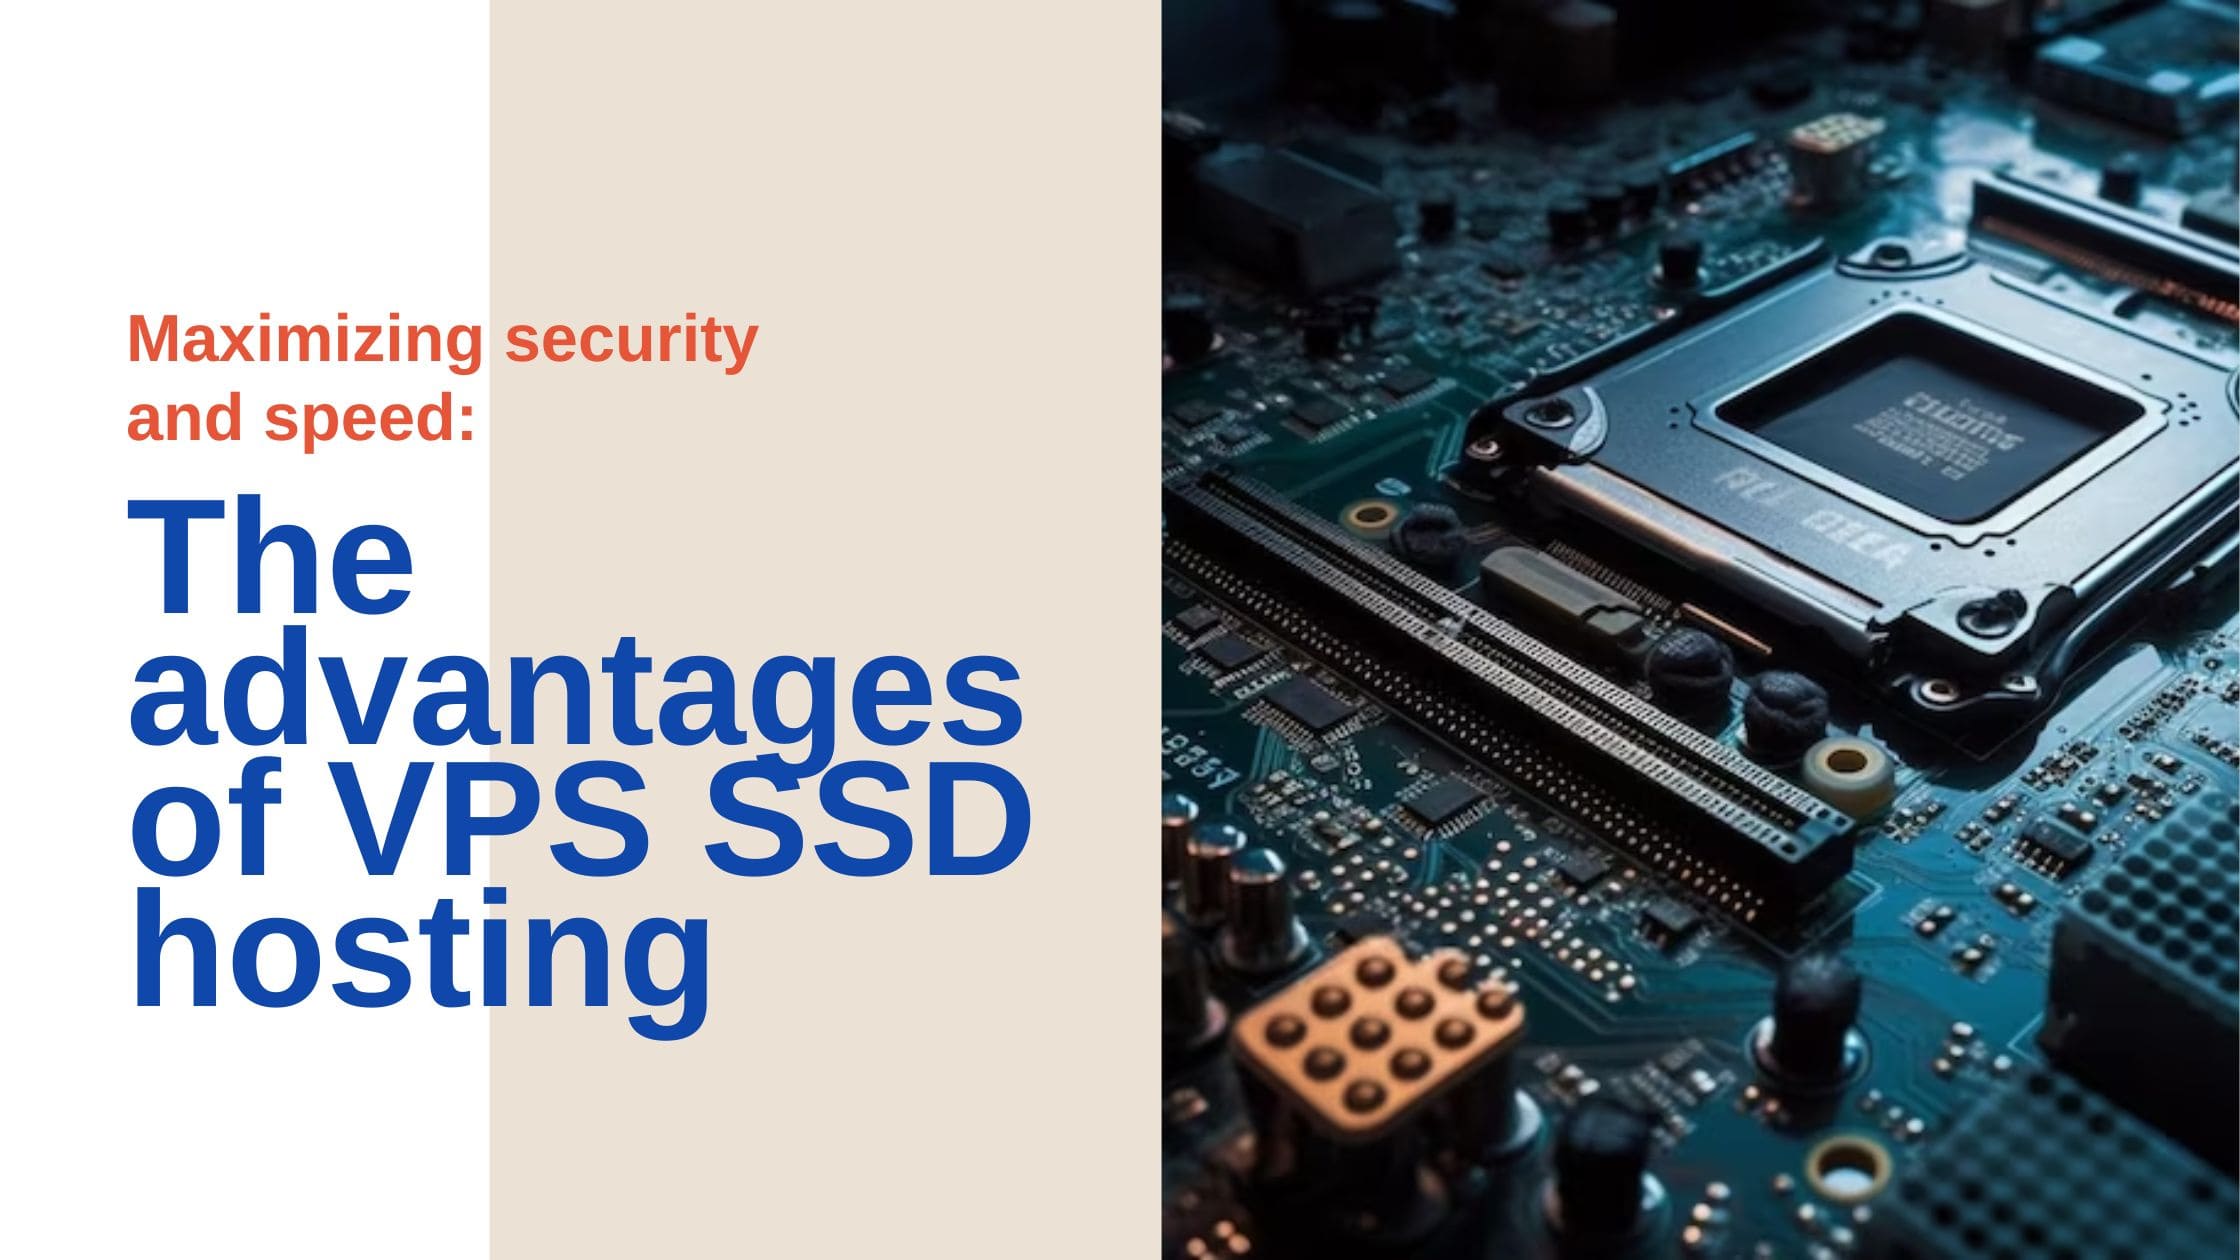 Maximizing security and speed: The advantages of VPS SSD hosting